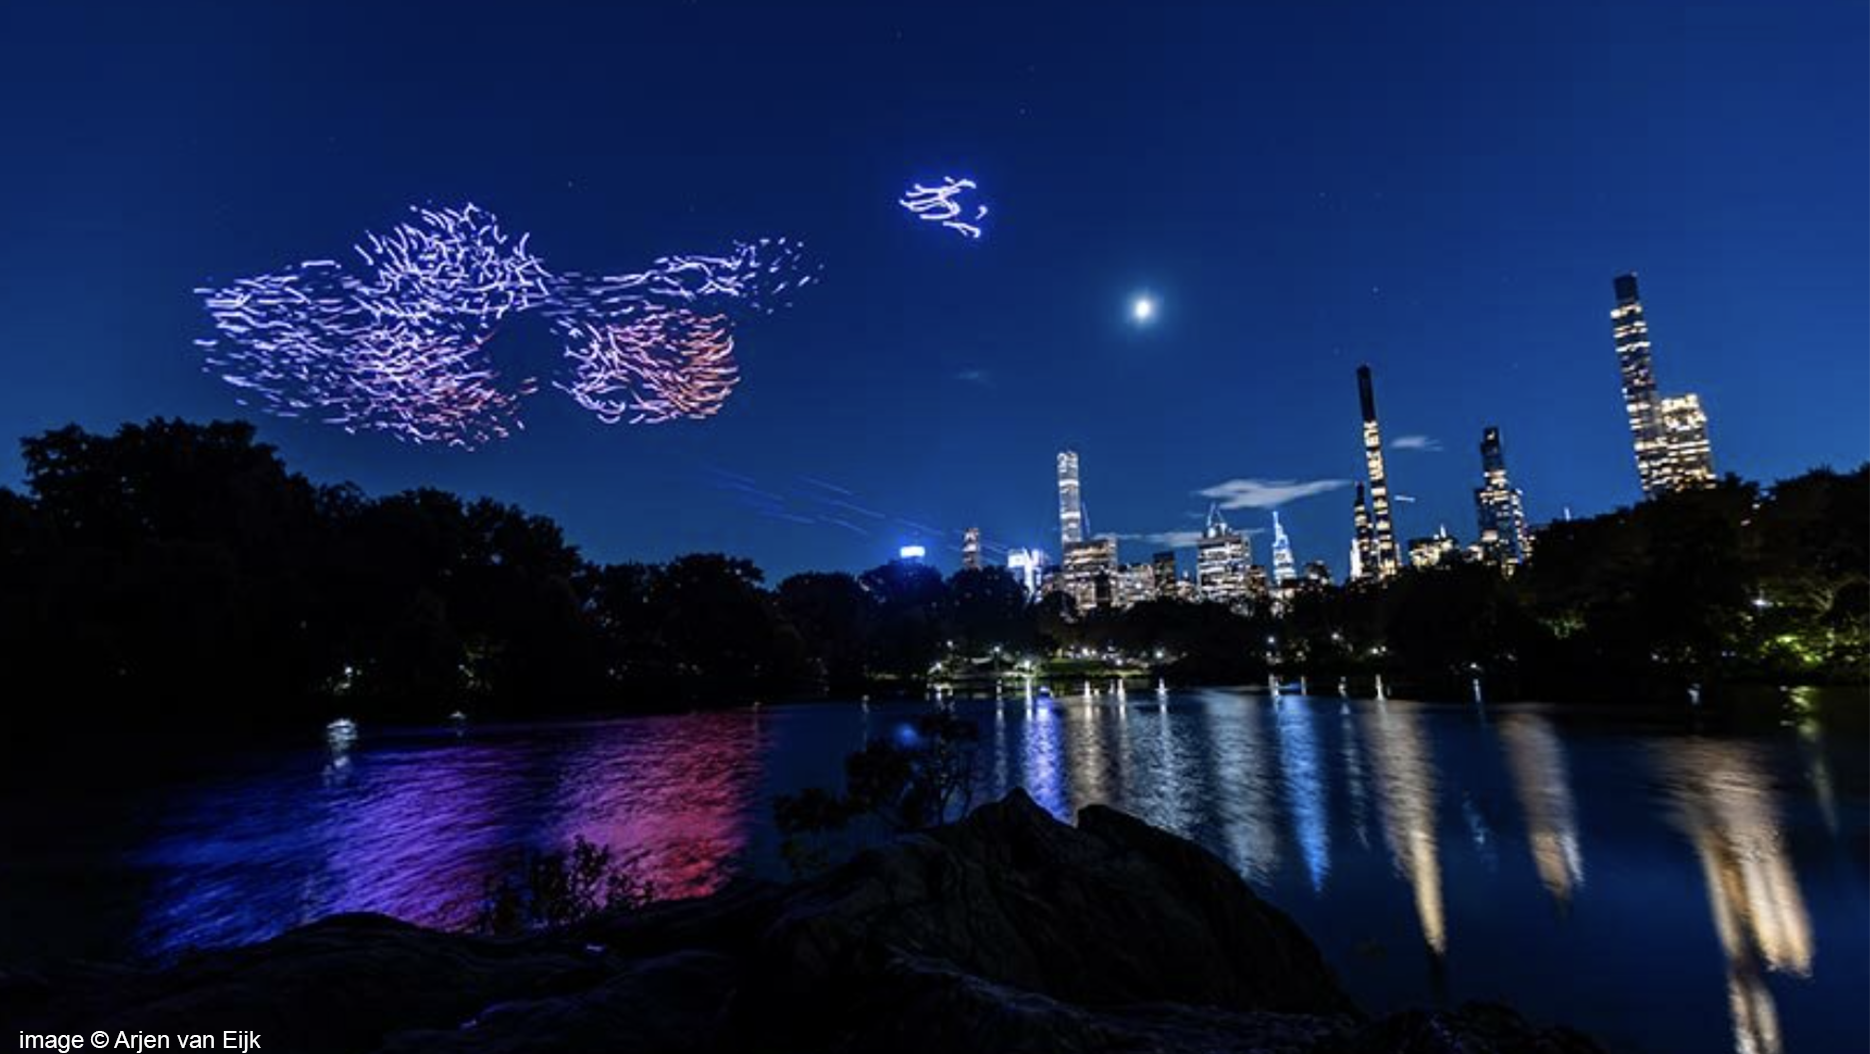 Nova flies first ever drone show in Central park with Studio DRIFT flying sculpture 